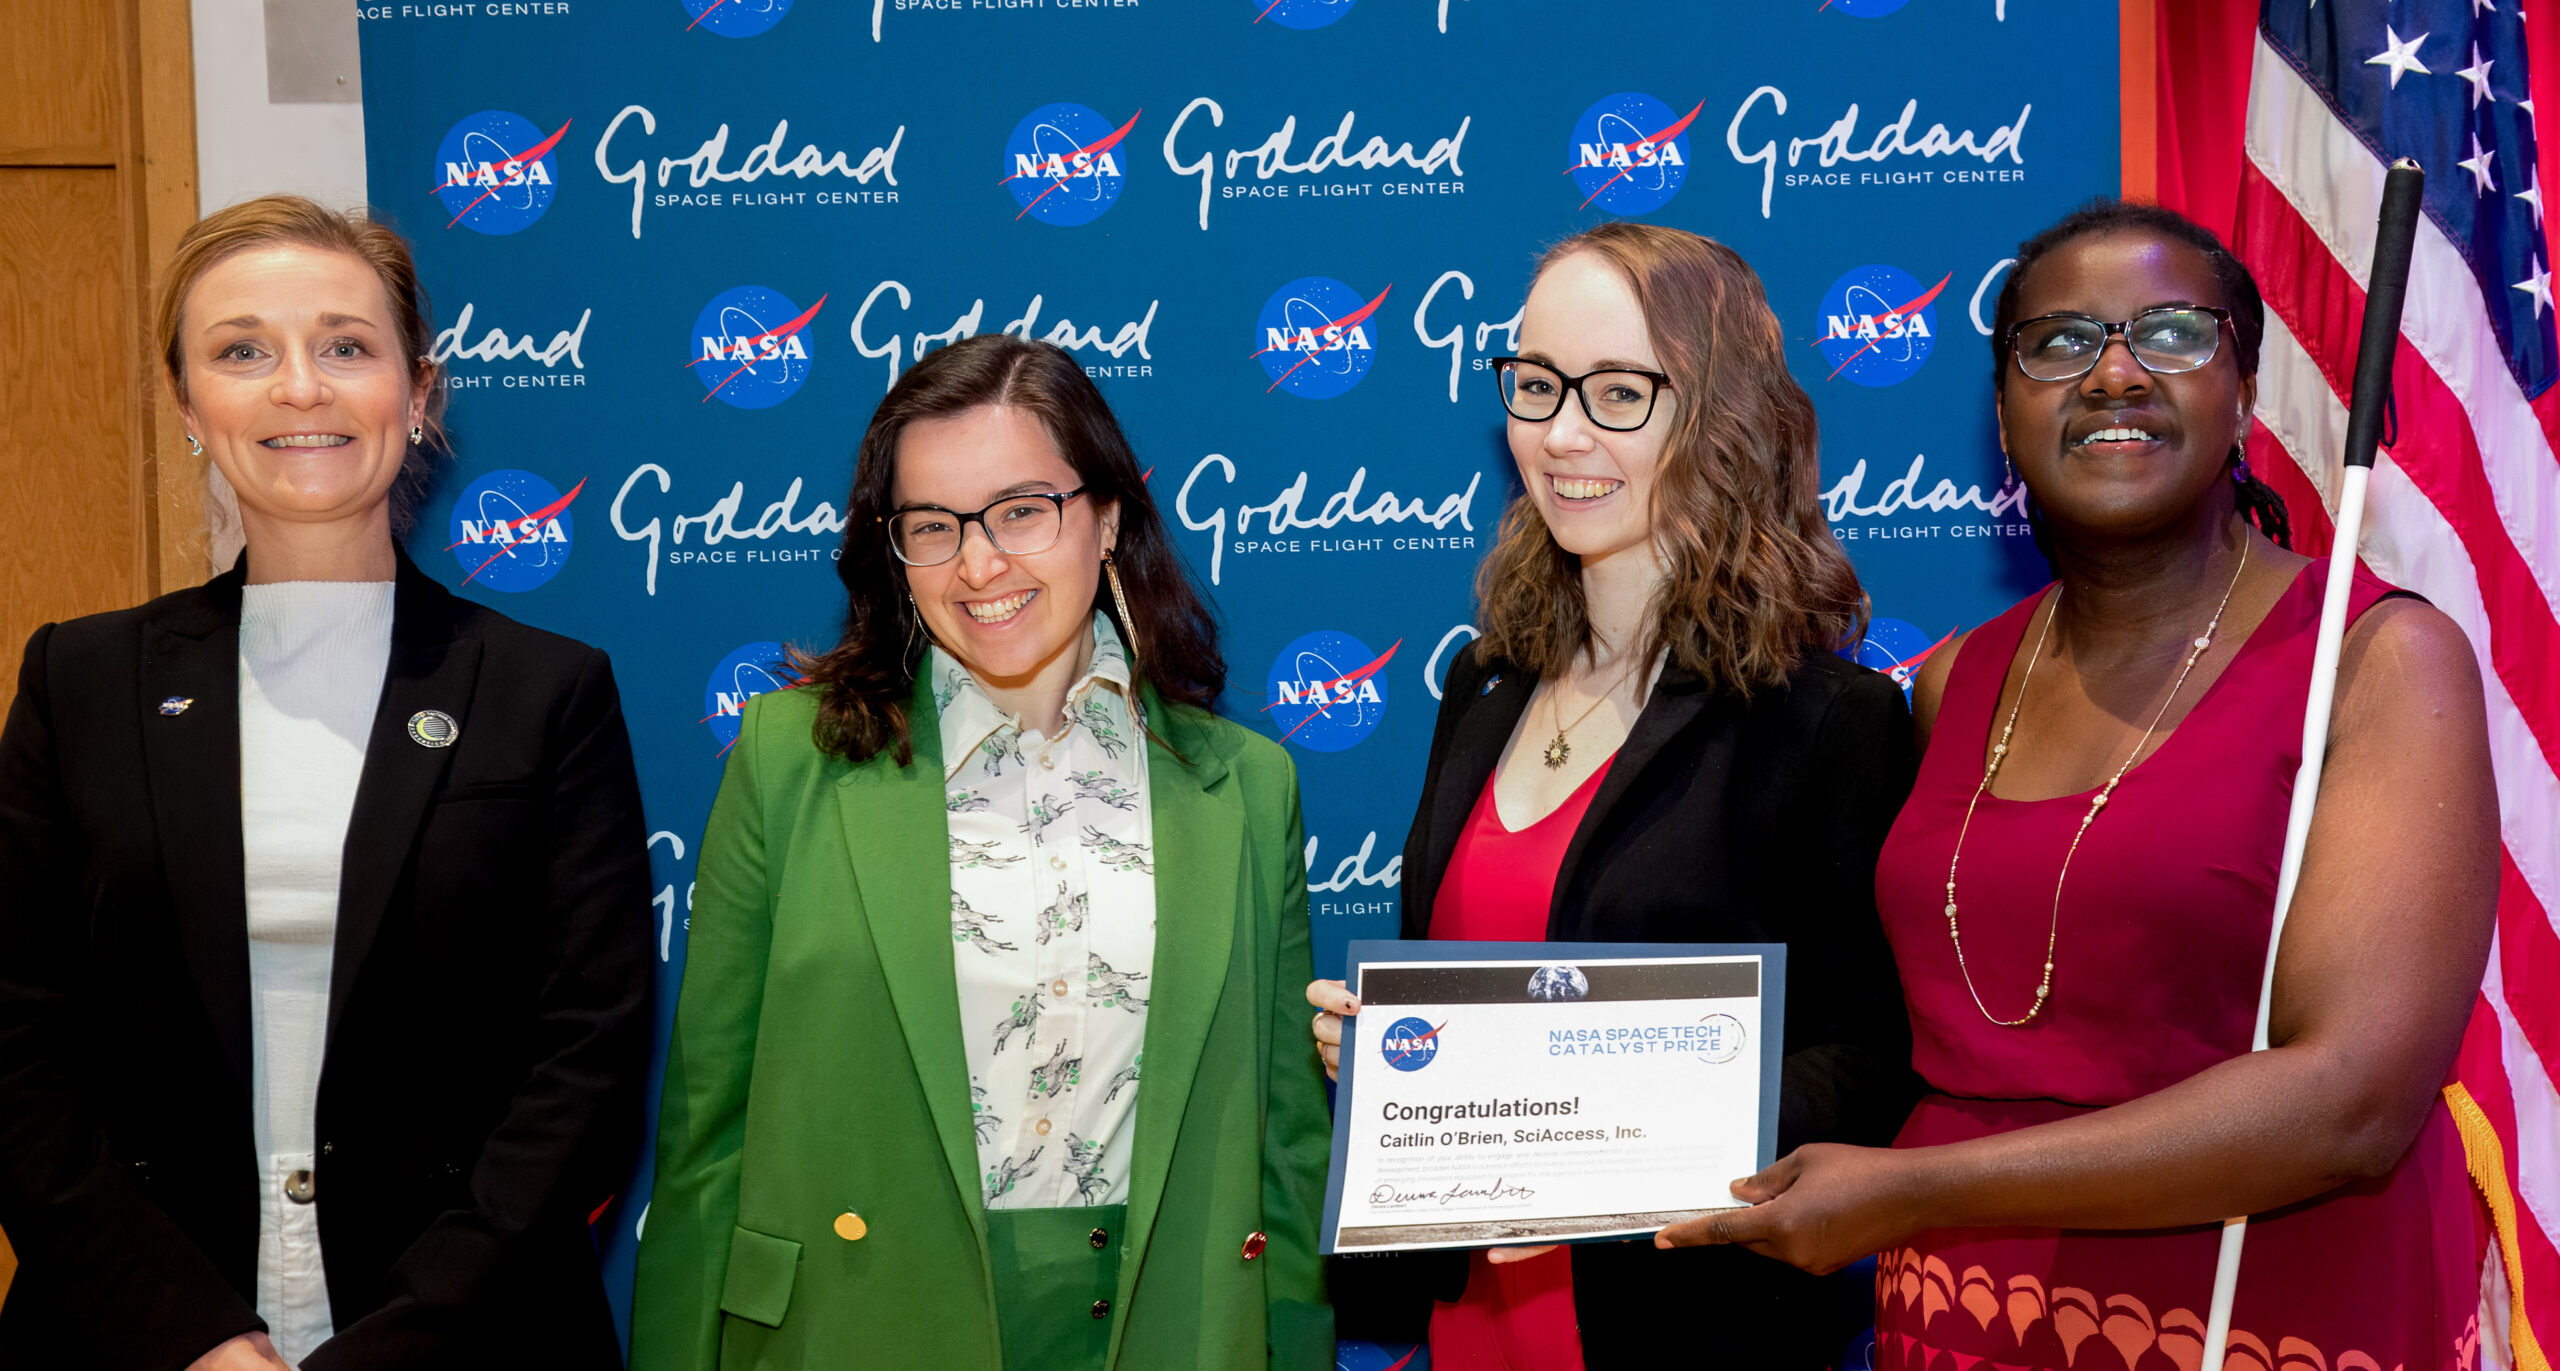 An image of four people smiling in front of a NASA Goddard backdrop. From left to right: Jenn Gustetic, Anna Voelker, Caitlin O'Brien, and Denna Lambert. Caitlin holds an award certificate and Deena is holding a white cane.